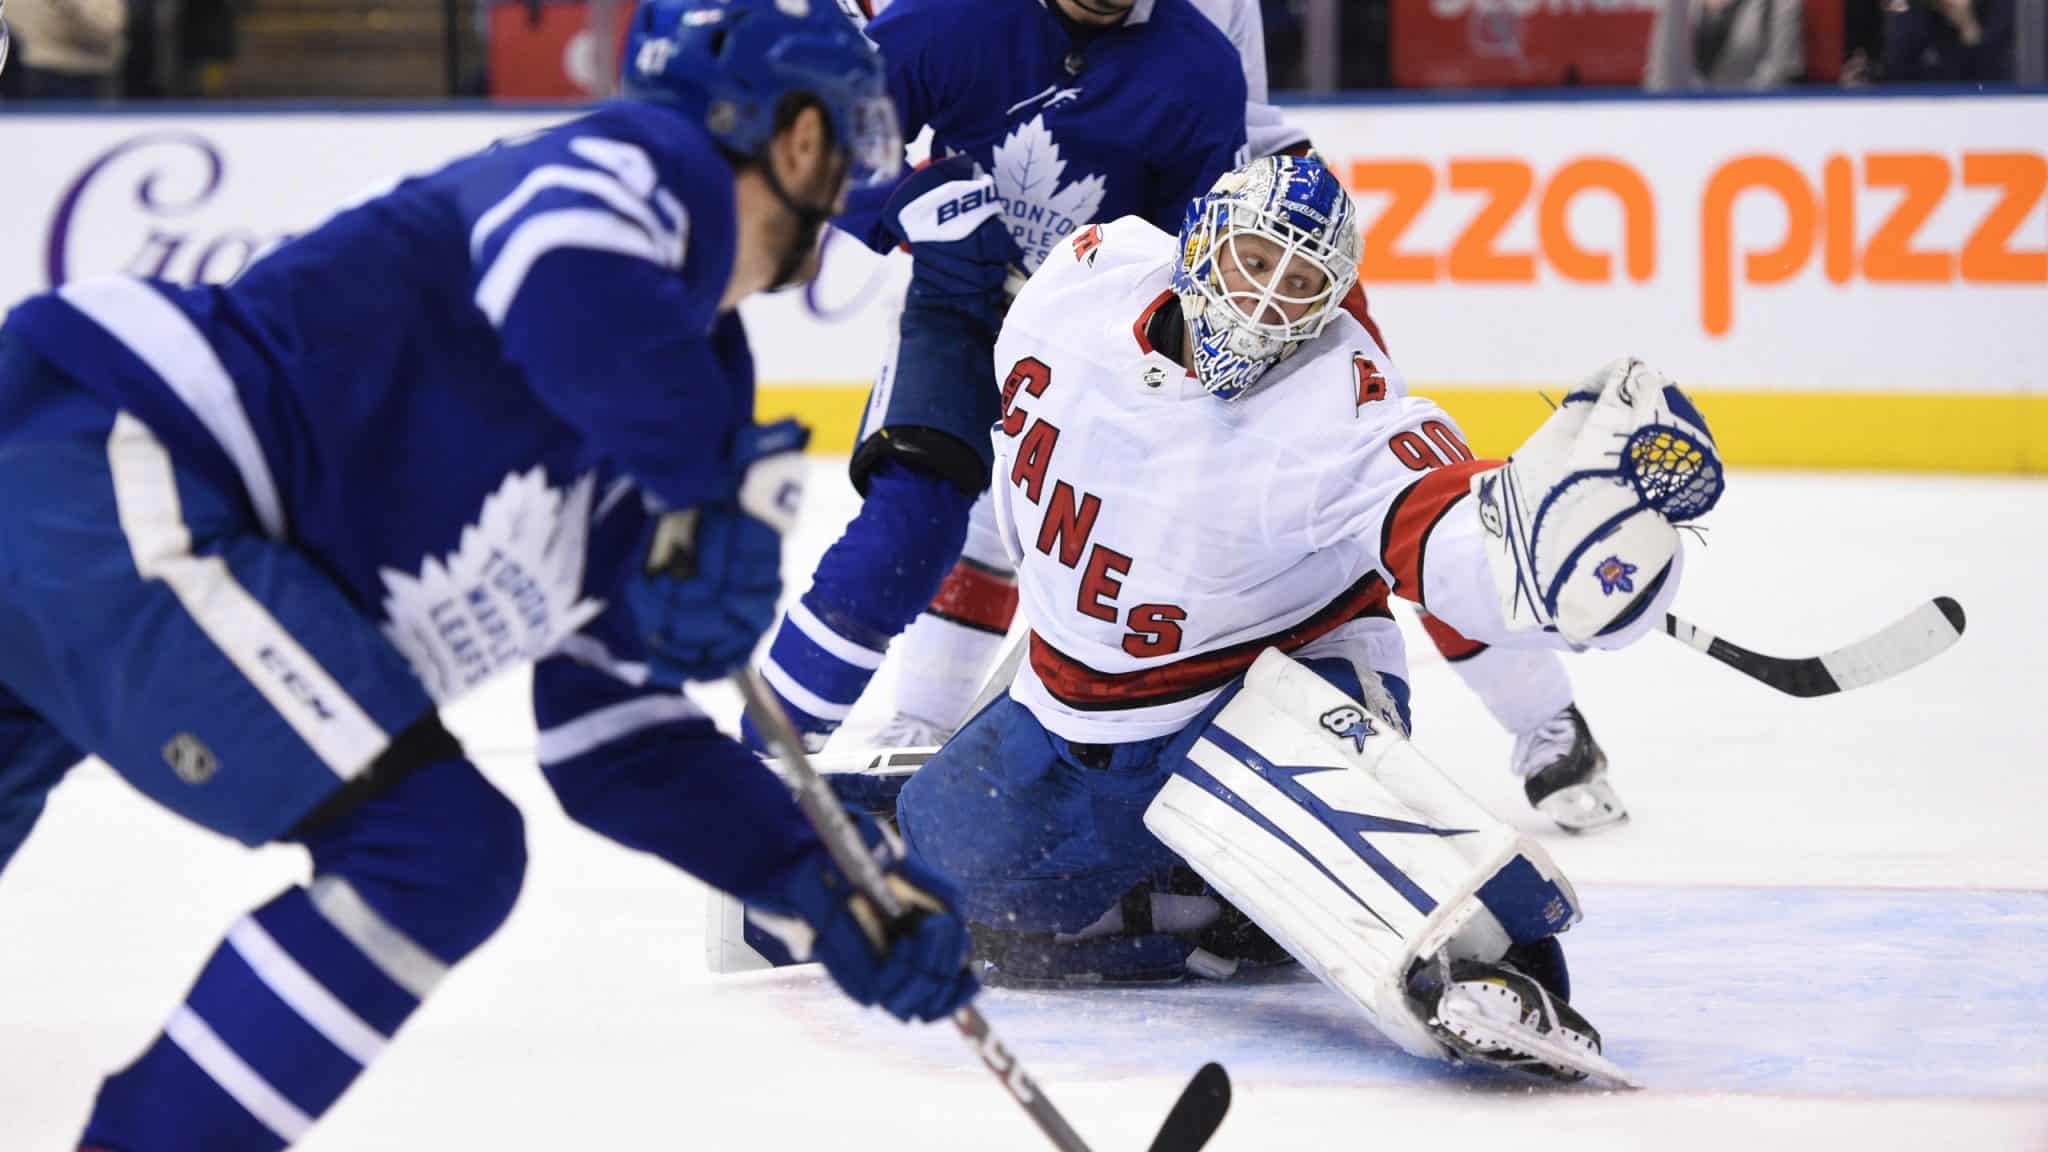 Toronto Maple Leafs left wing Pierre Engvall (47) scores his team's third goal of the game against Carolina Hurricanes emergency goalie David Ayres (90) during second-period NHL hockey game action in Toronto, Saturday, Feb. 22, 2020.